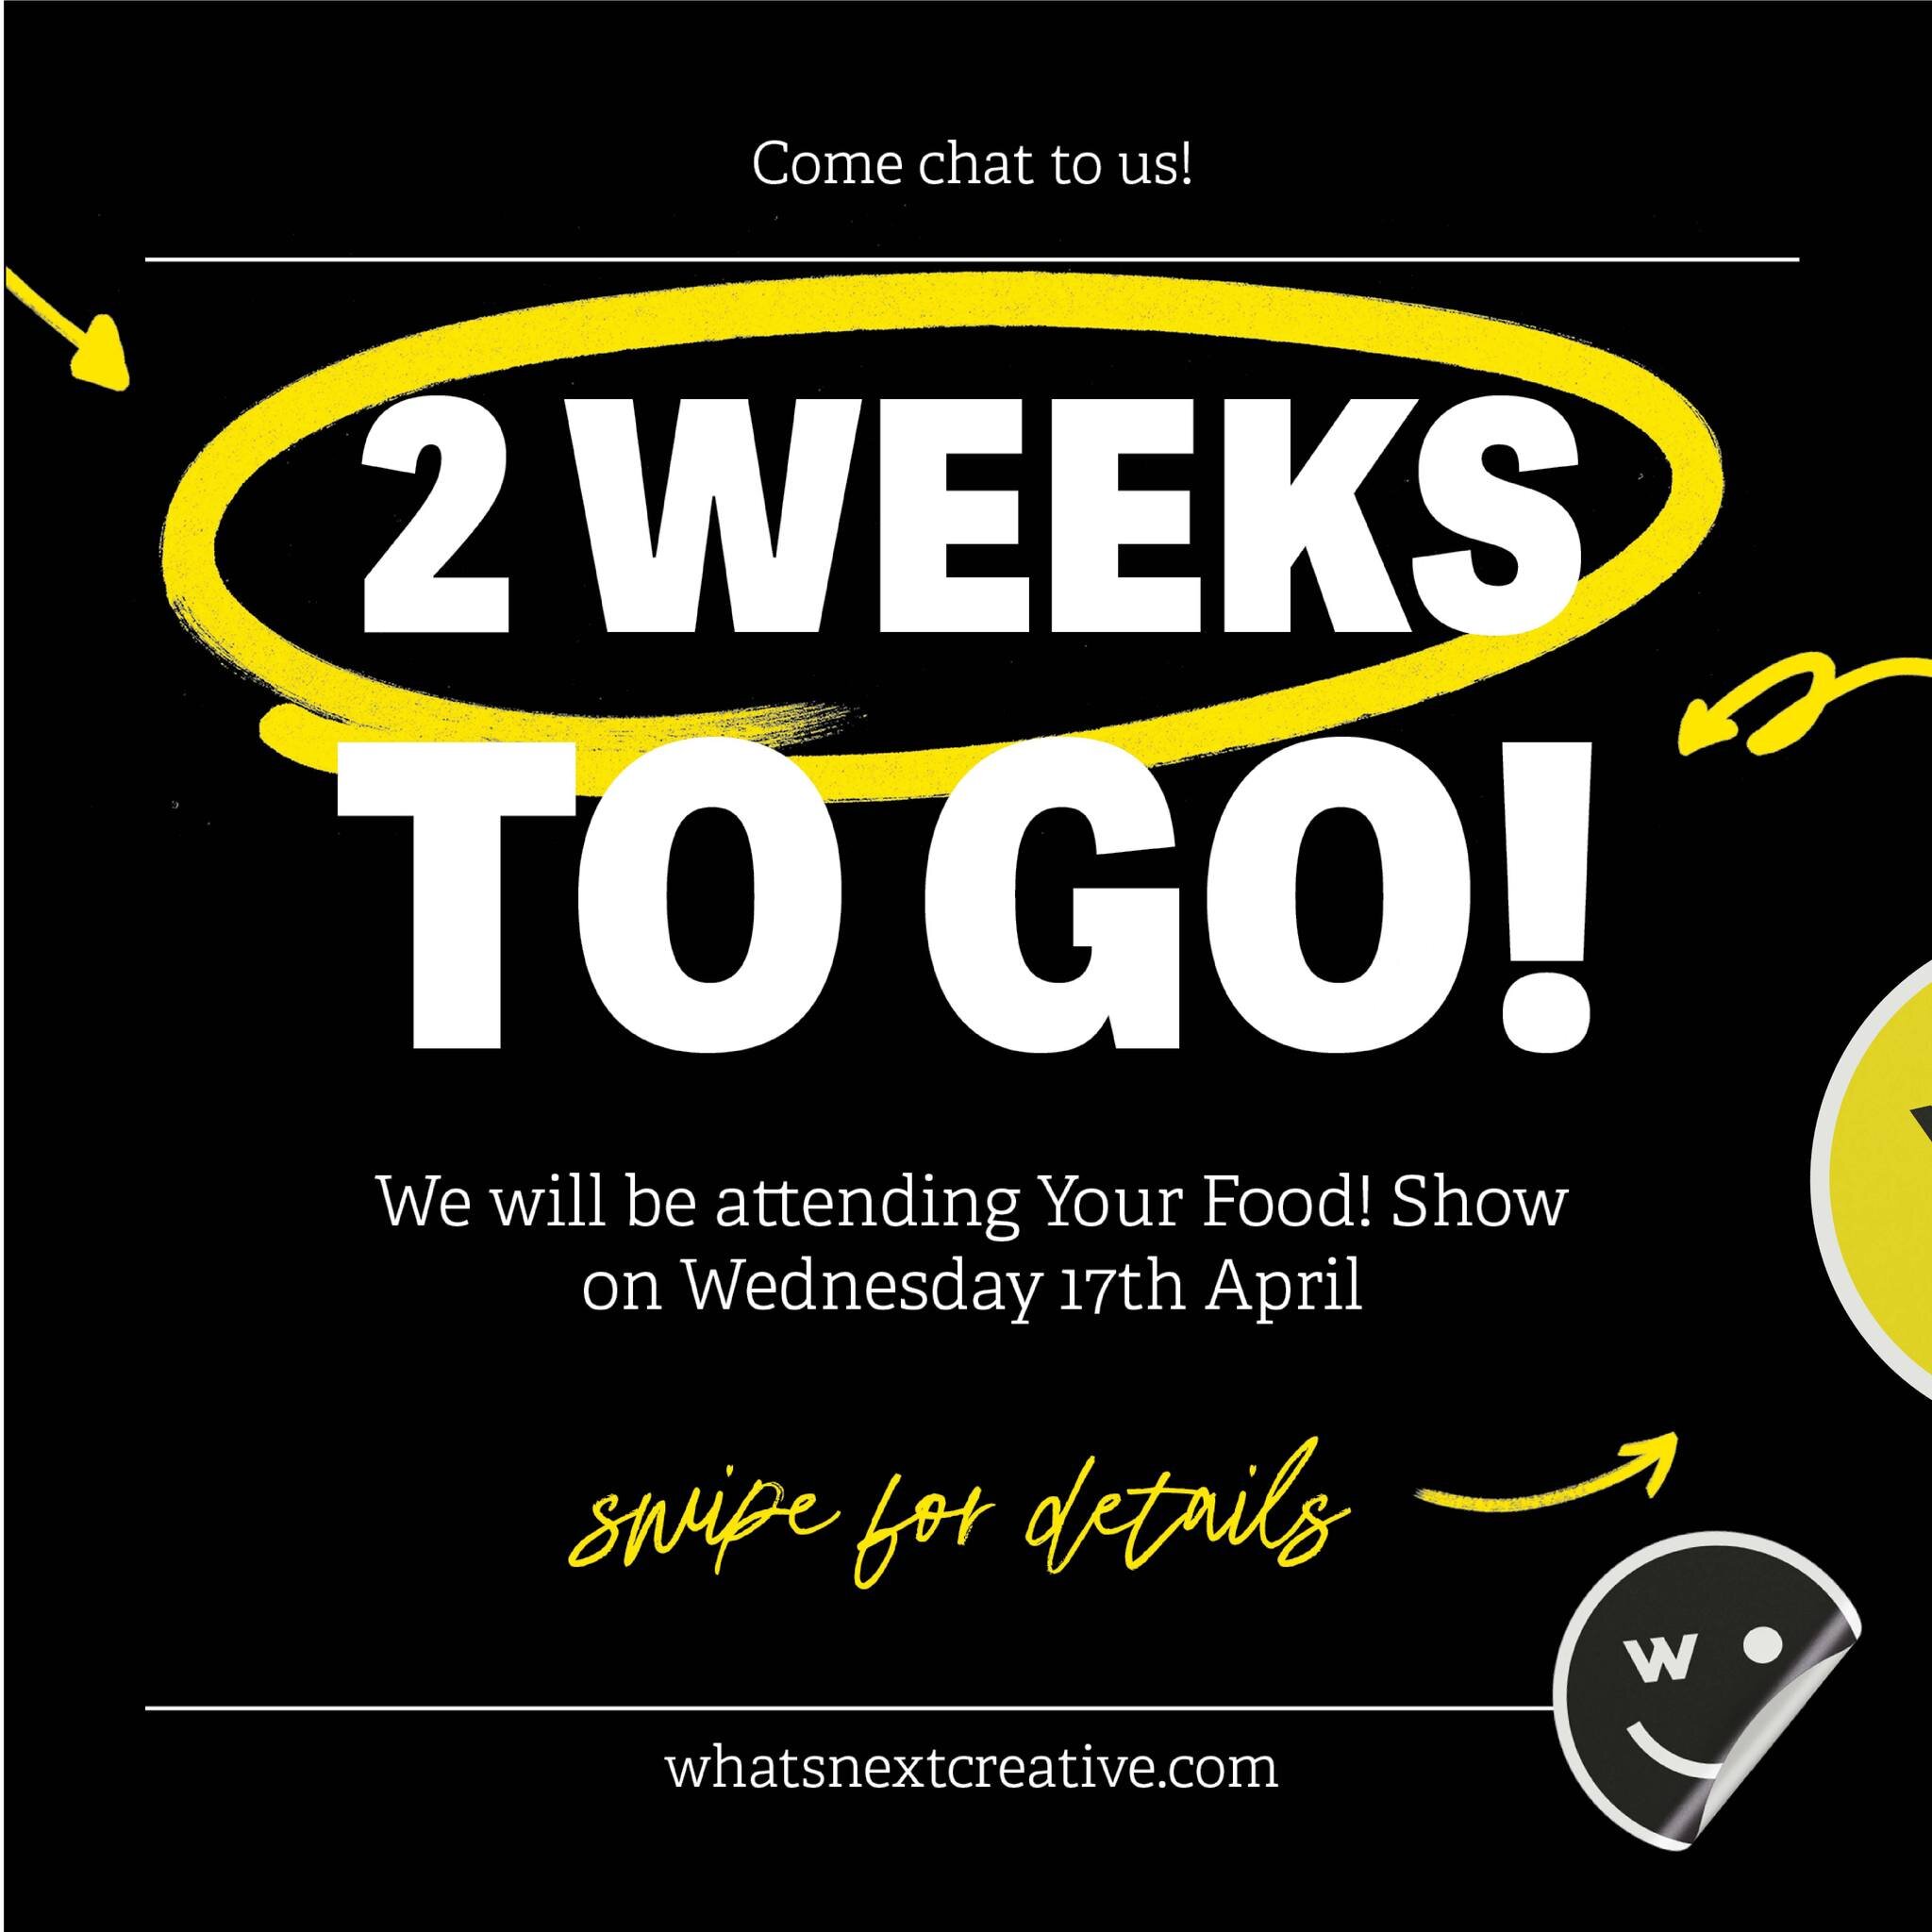 😎2 weeks to go 😎 until the your Food! Show in Coleraine in April! Come and visit us to chat all things creative on Wednesday 17th April. We'll be there from 10am-5pm, make sure to stop by to have a chat and of course to sample some tasty things!

R